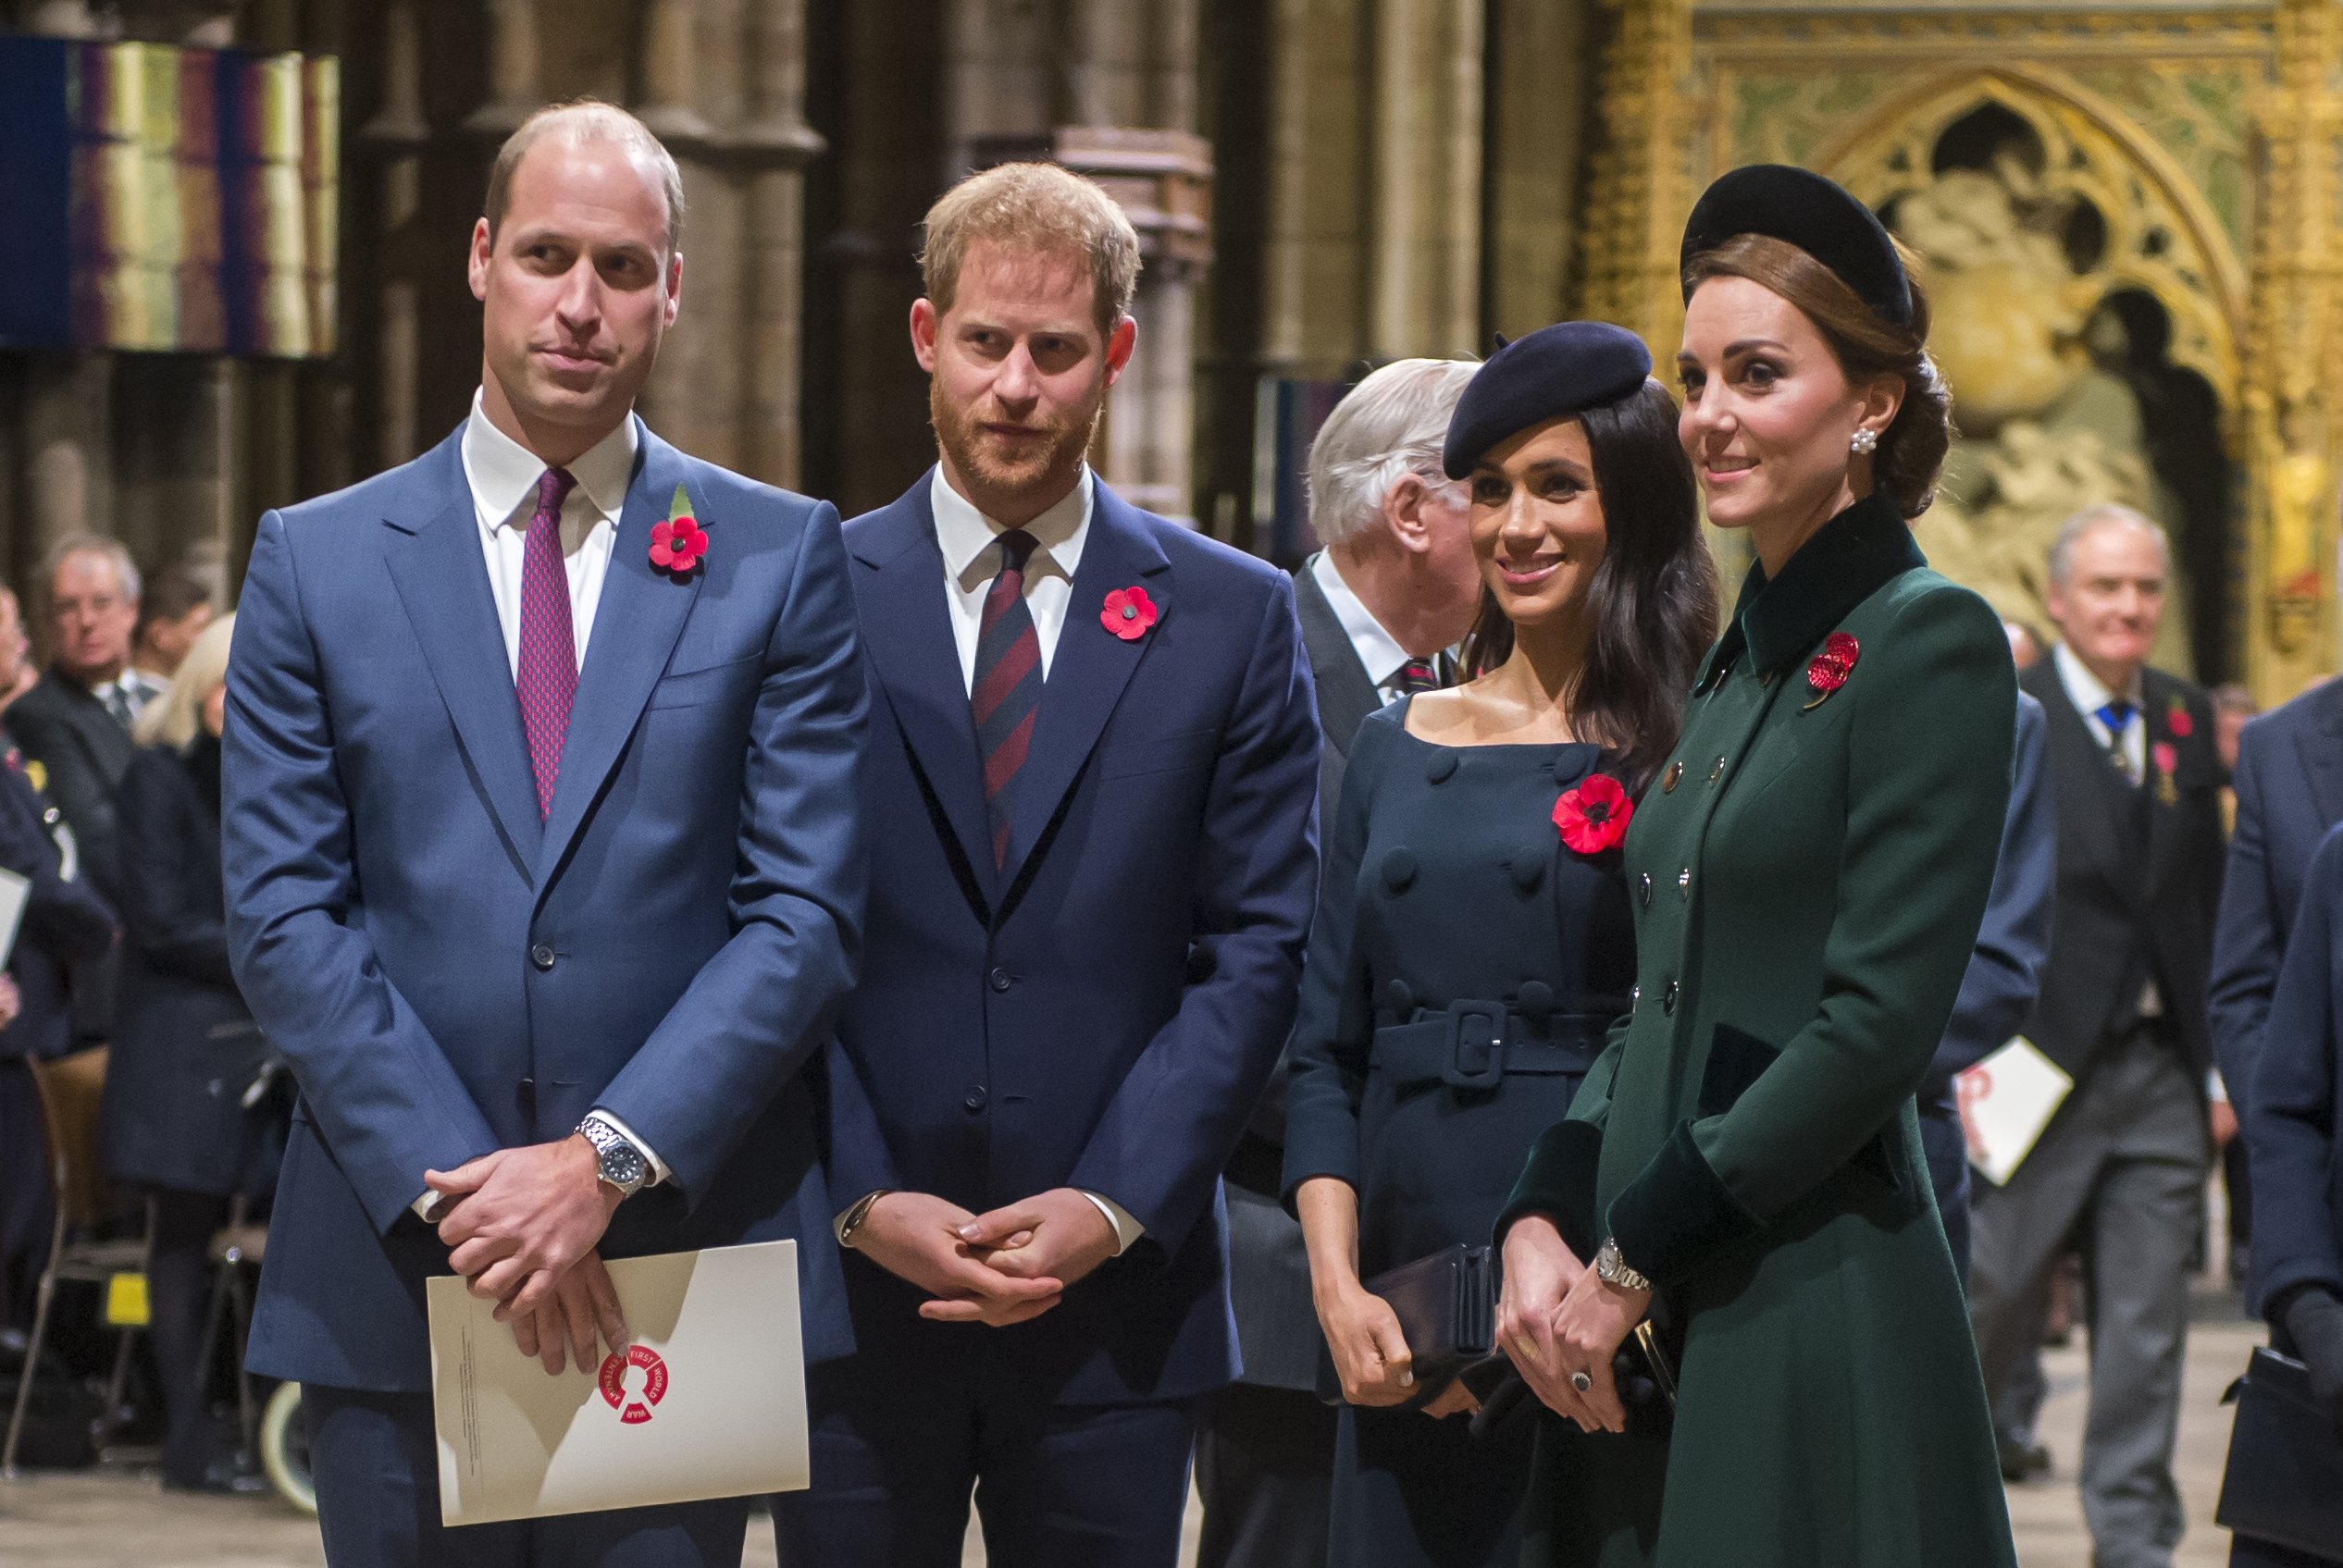 Prince William, Kate Middleton, Prince Harry and Meghan Markle attend a service at Westminster Abbey on November 11, 2018 | Photo: Getty Images